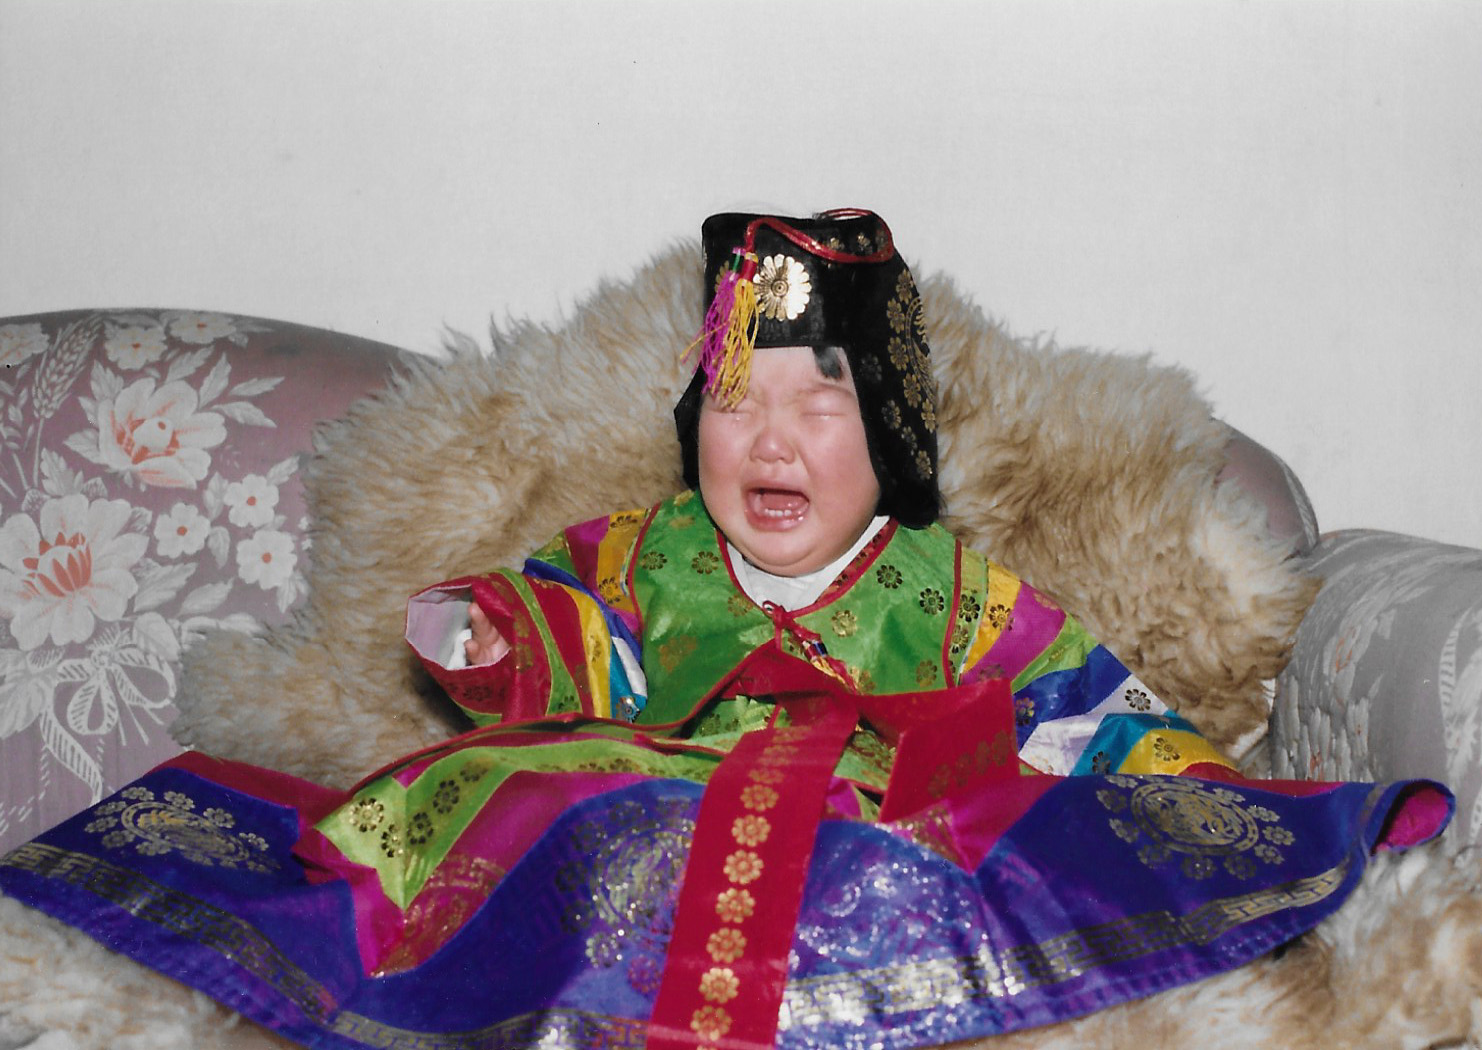 An archival family photo of Sora Park as an infant, crying, in traditional Korean garments.